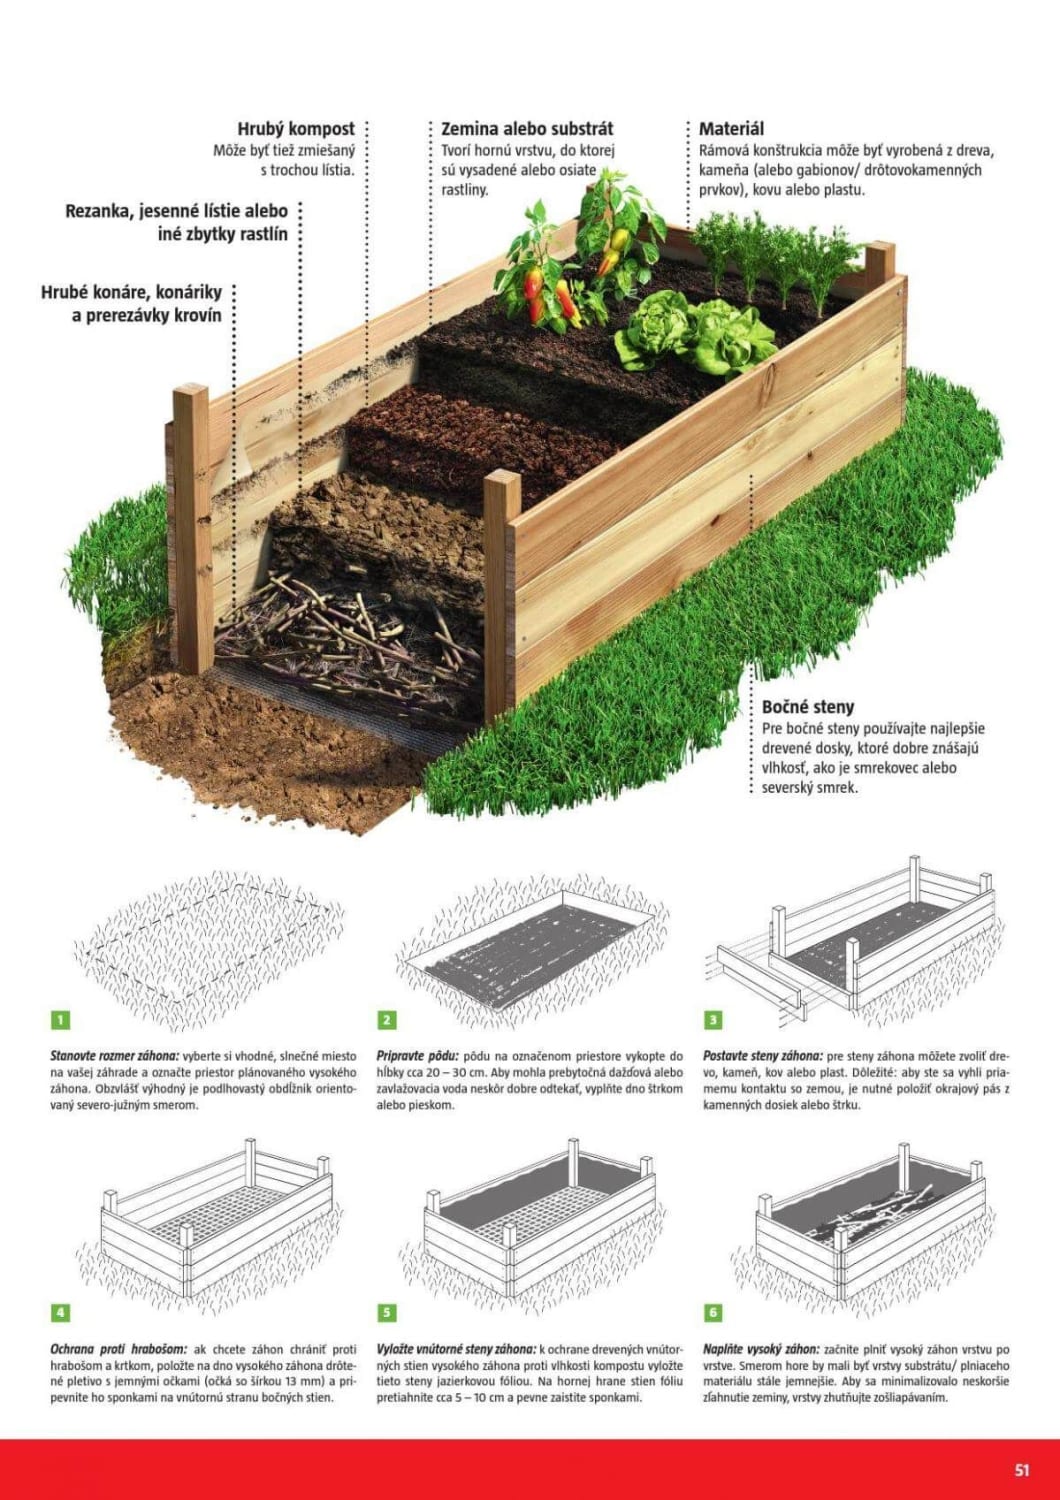 How To Build a Simple Raised Bed Plant?